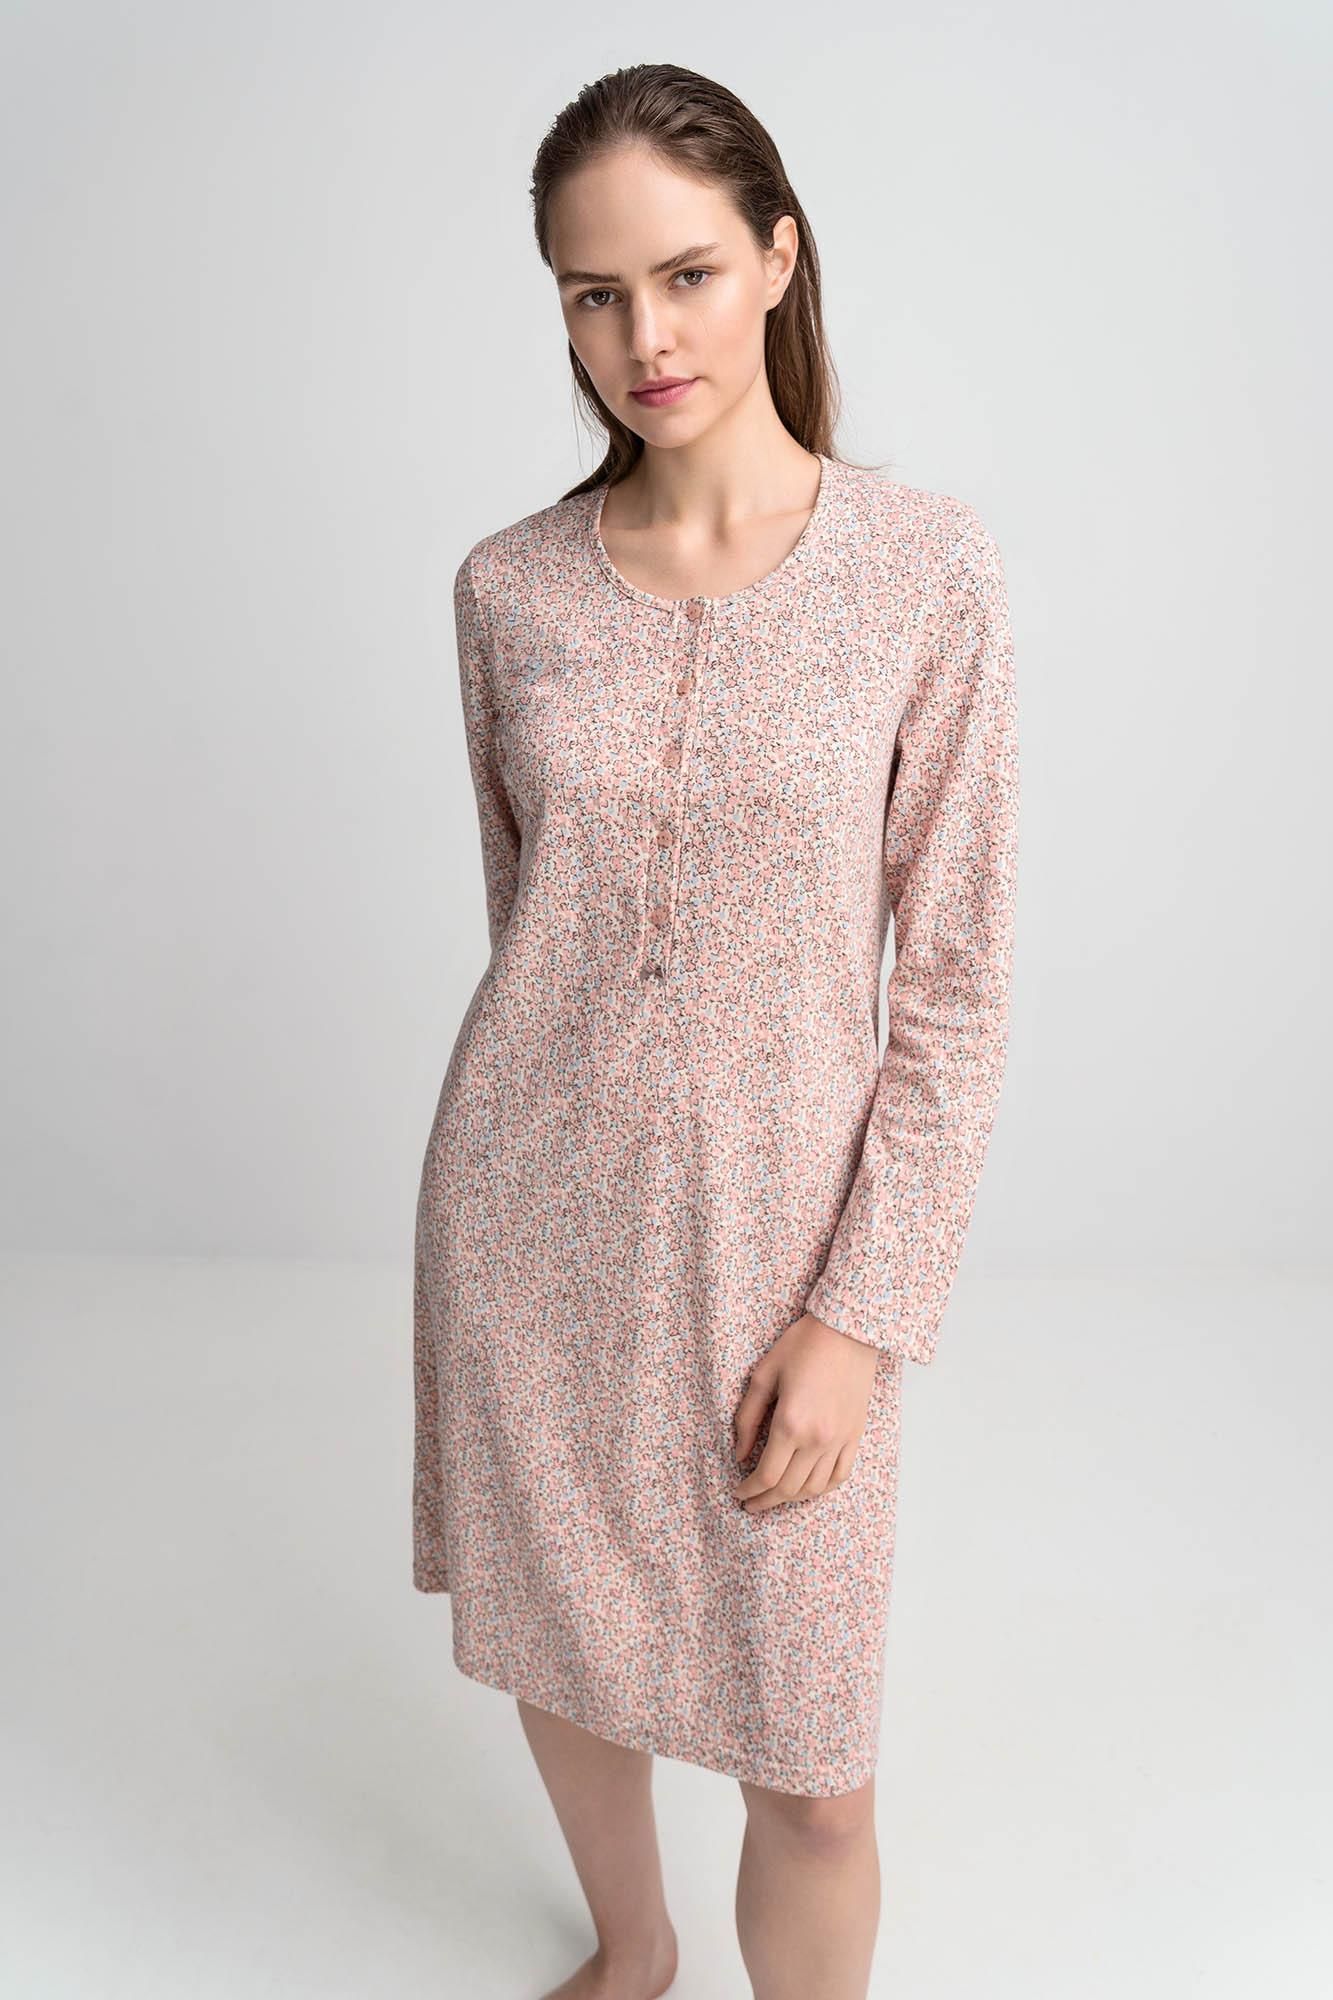 Women’s Printed Nightgown